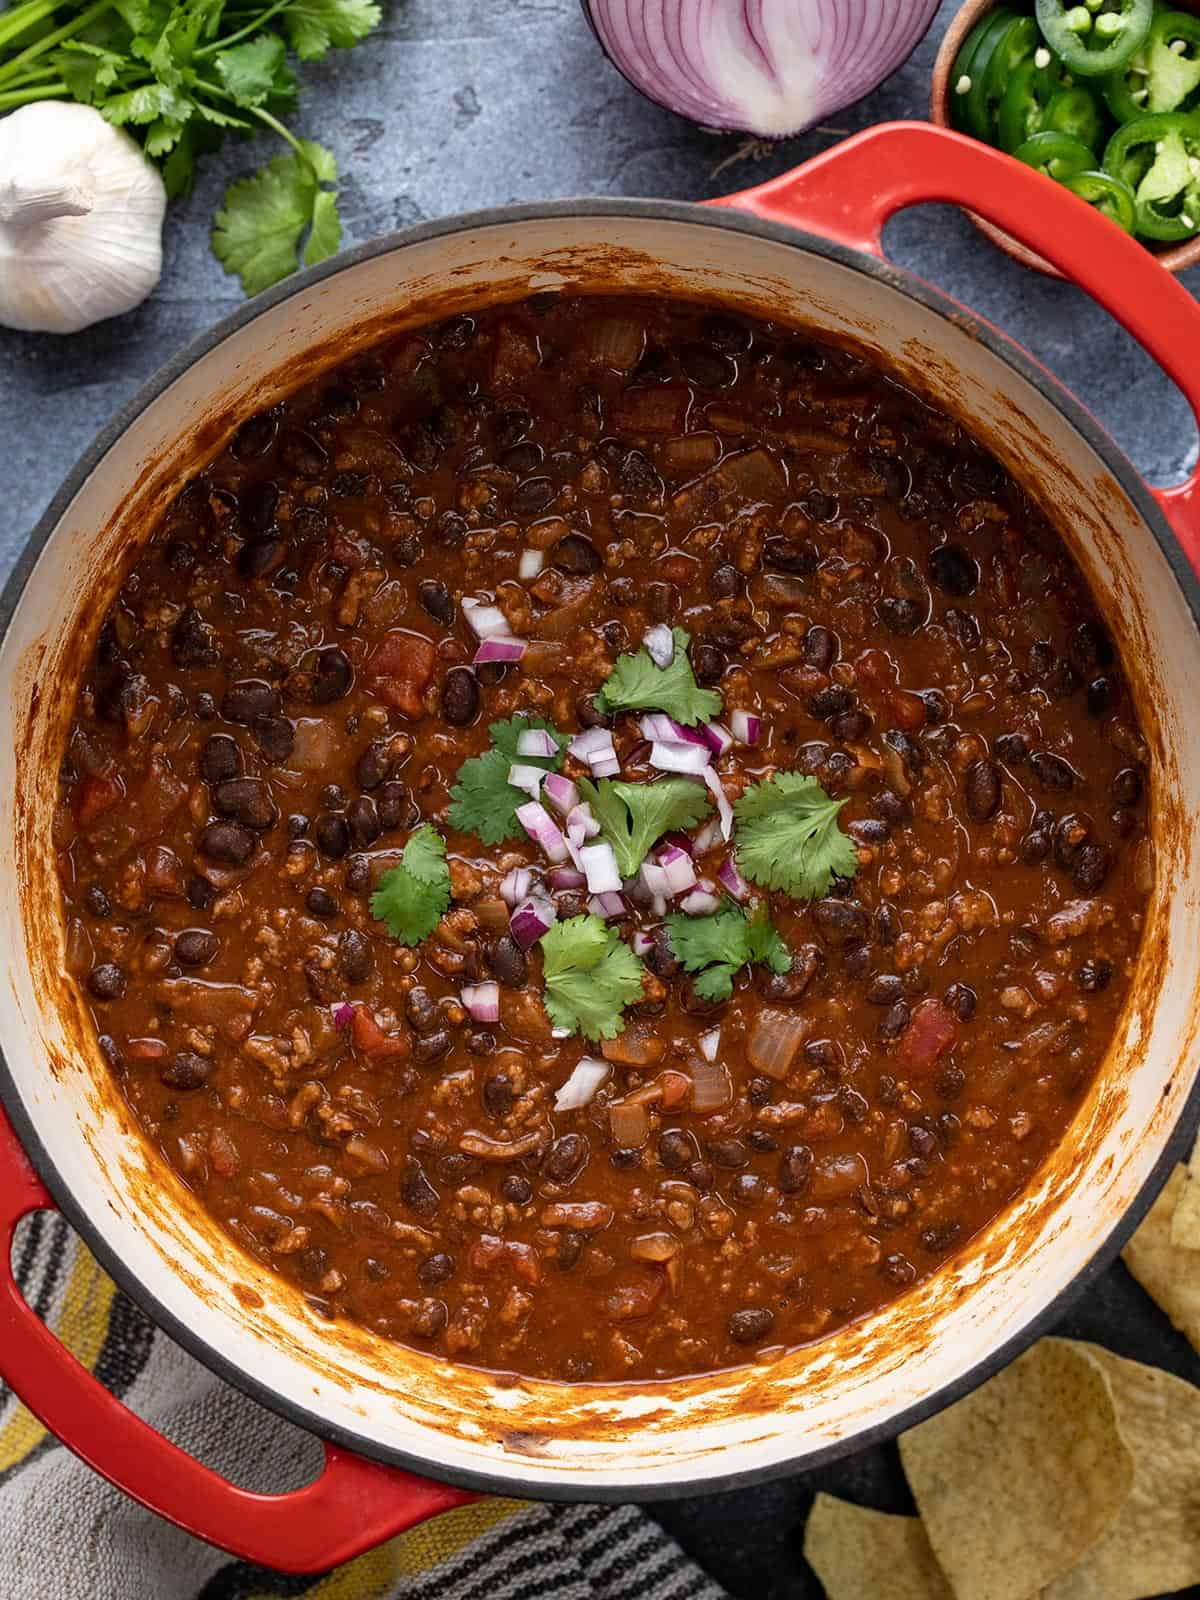 Overhead view of a pot full of black bean chili with toppings in the center of the pot.